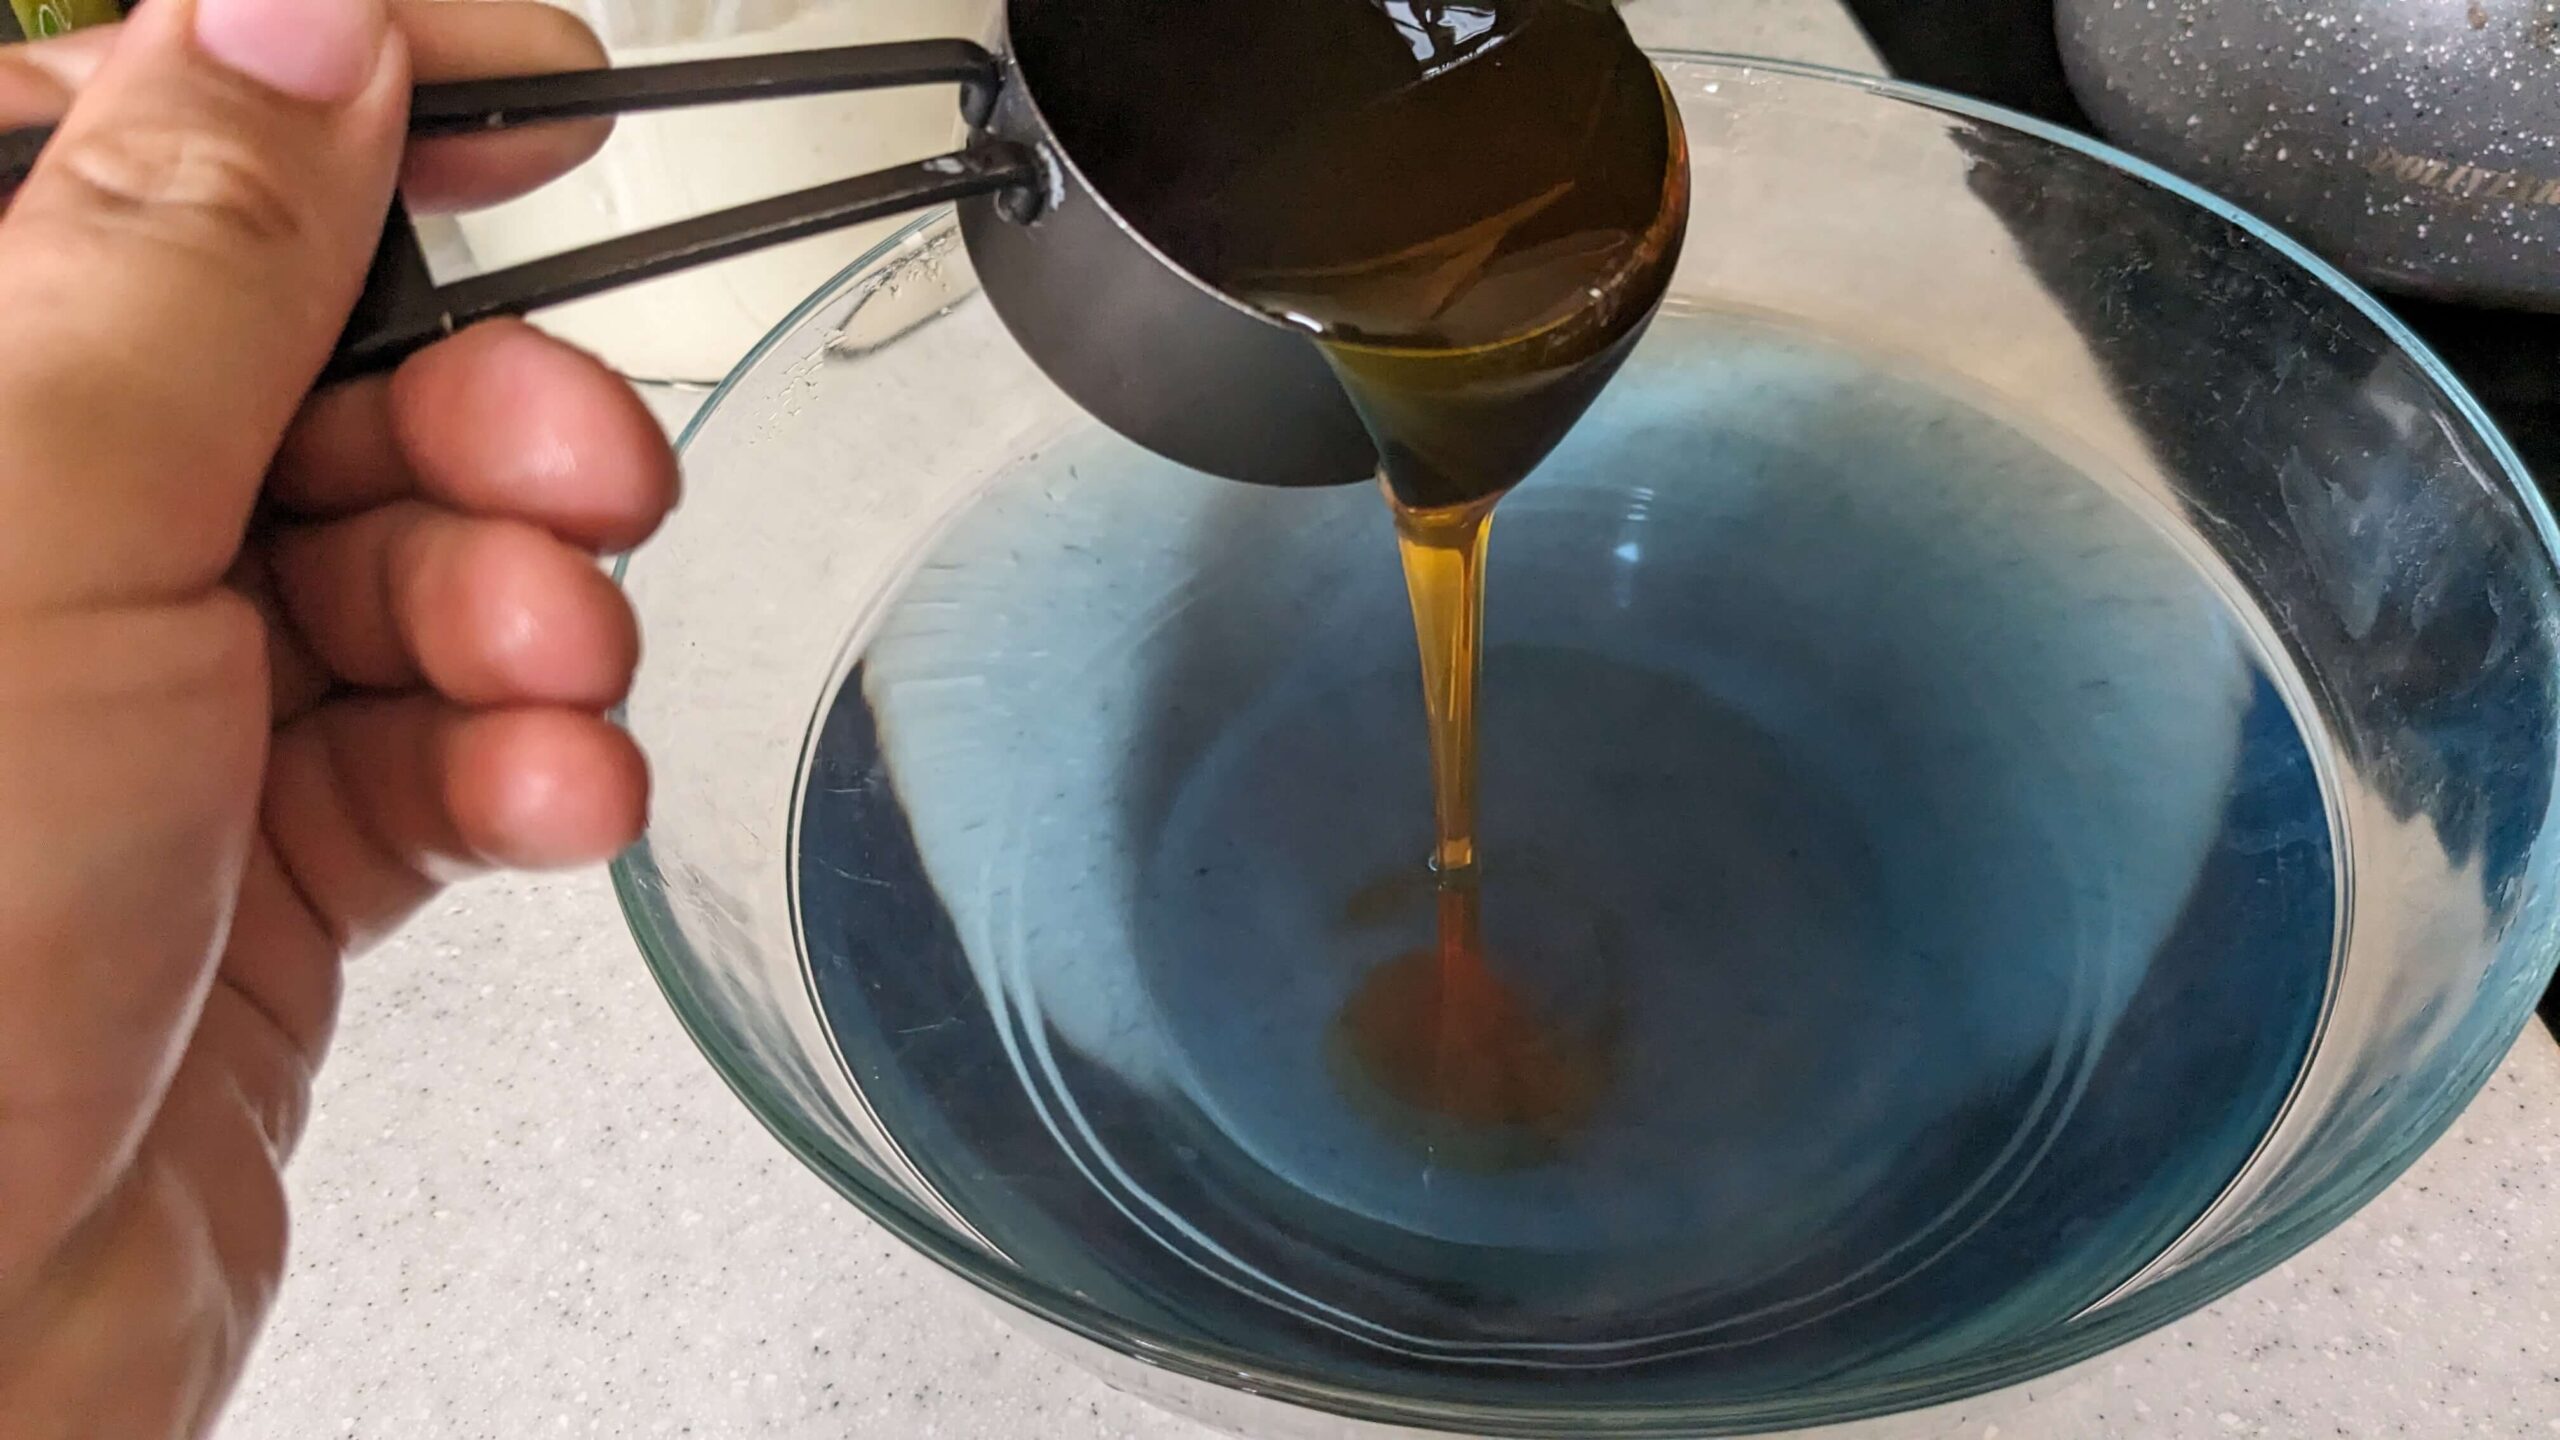 woman pouring honey out of a measuring cup into a bowl of blue liquid